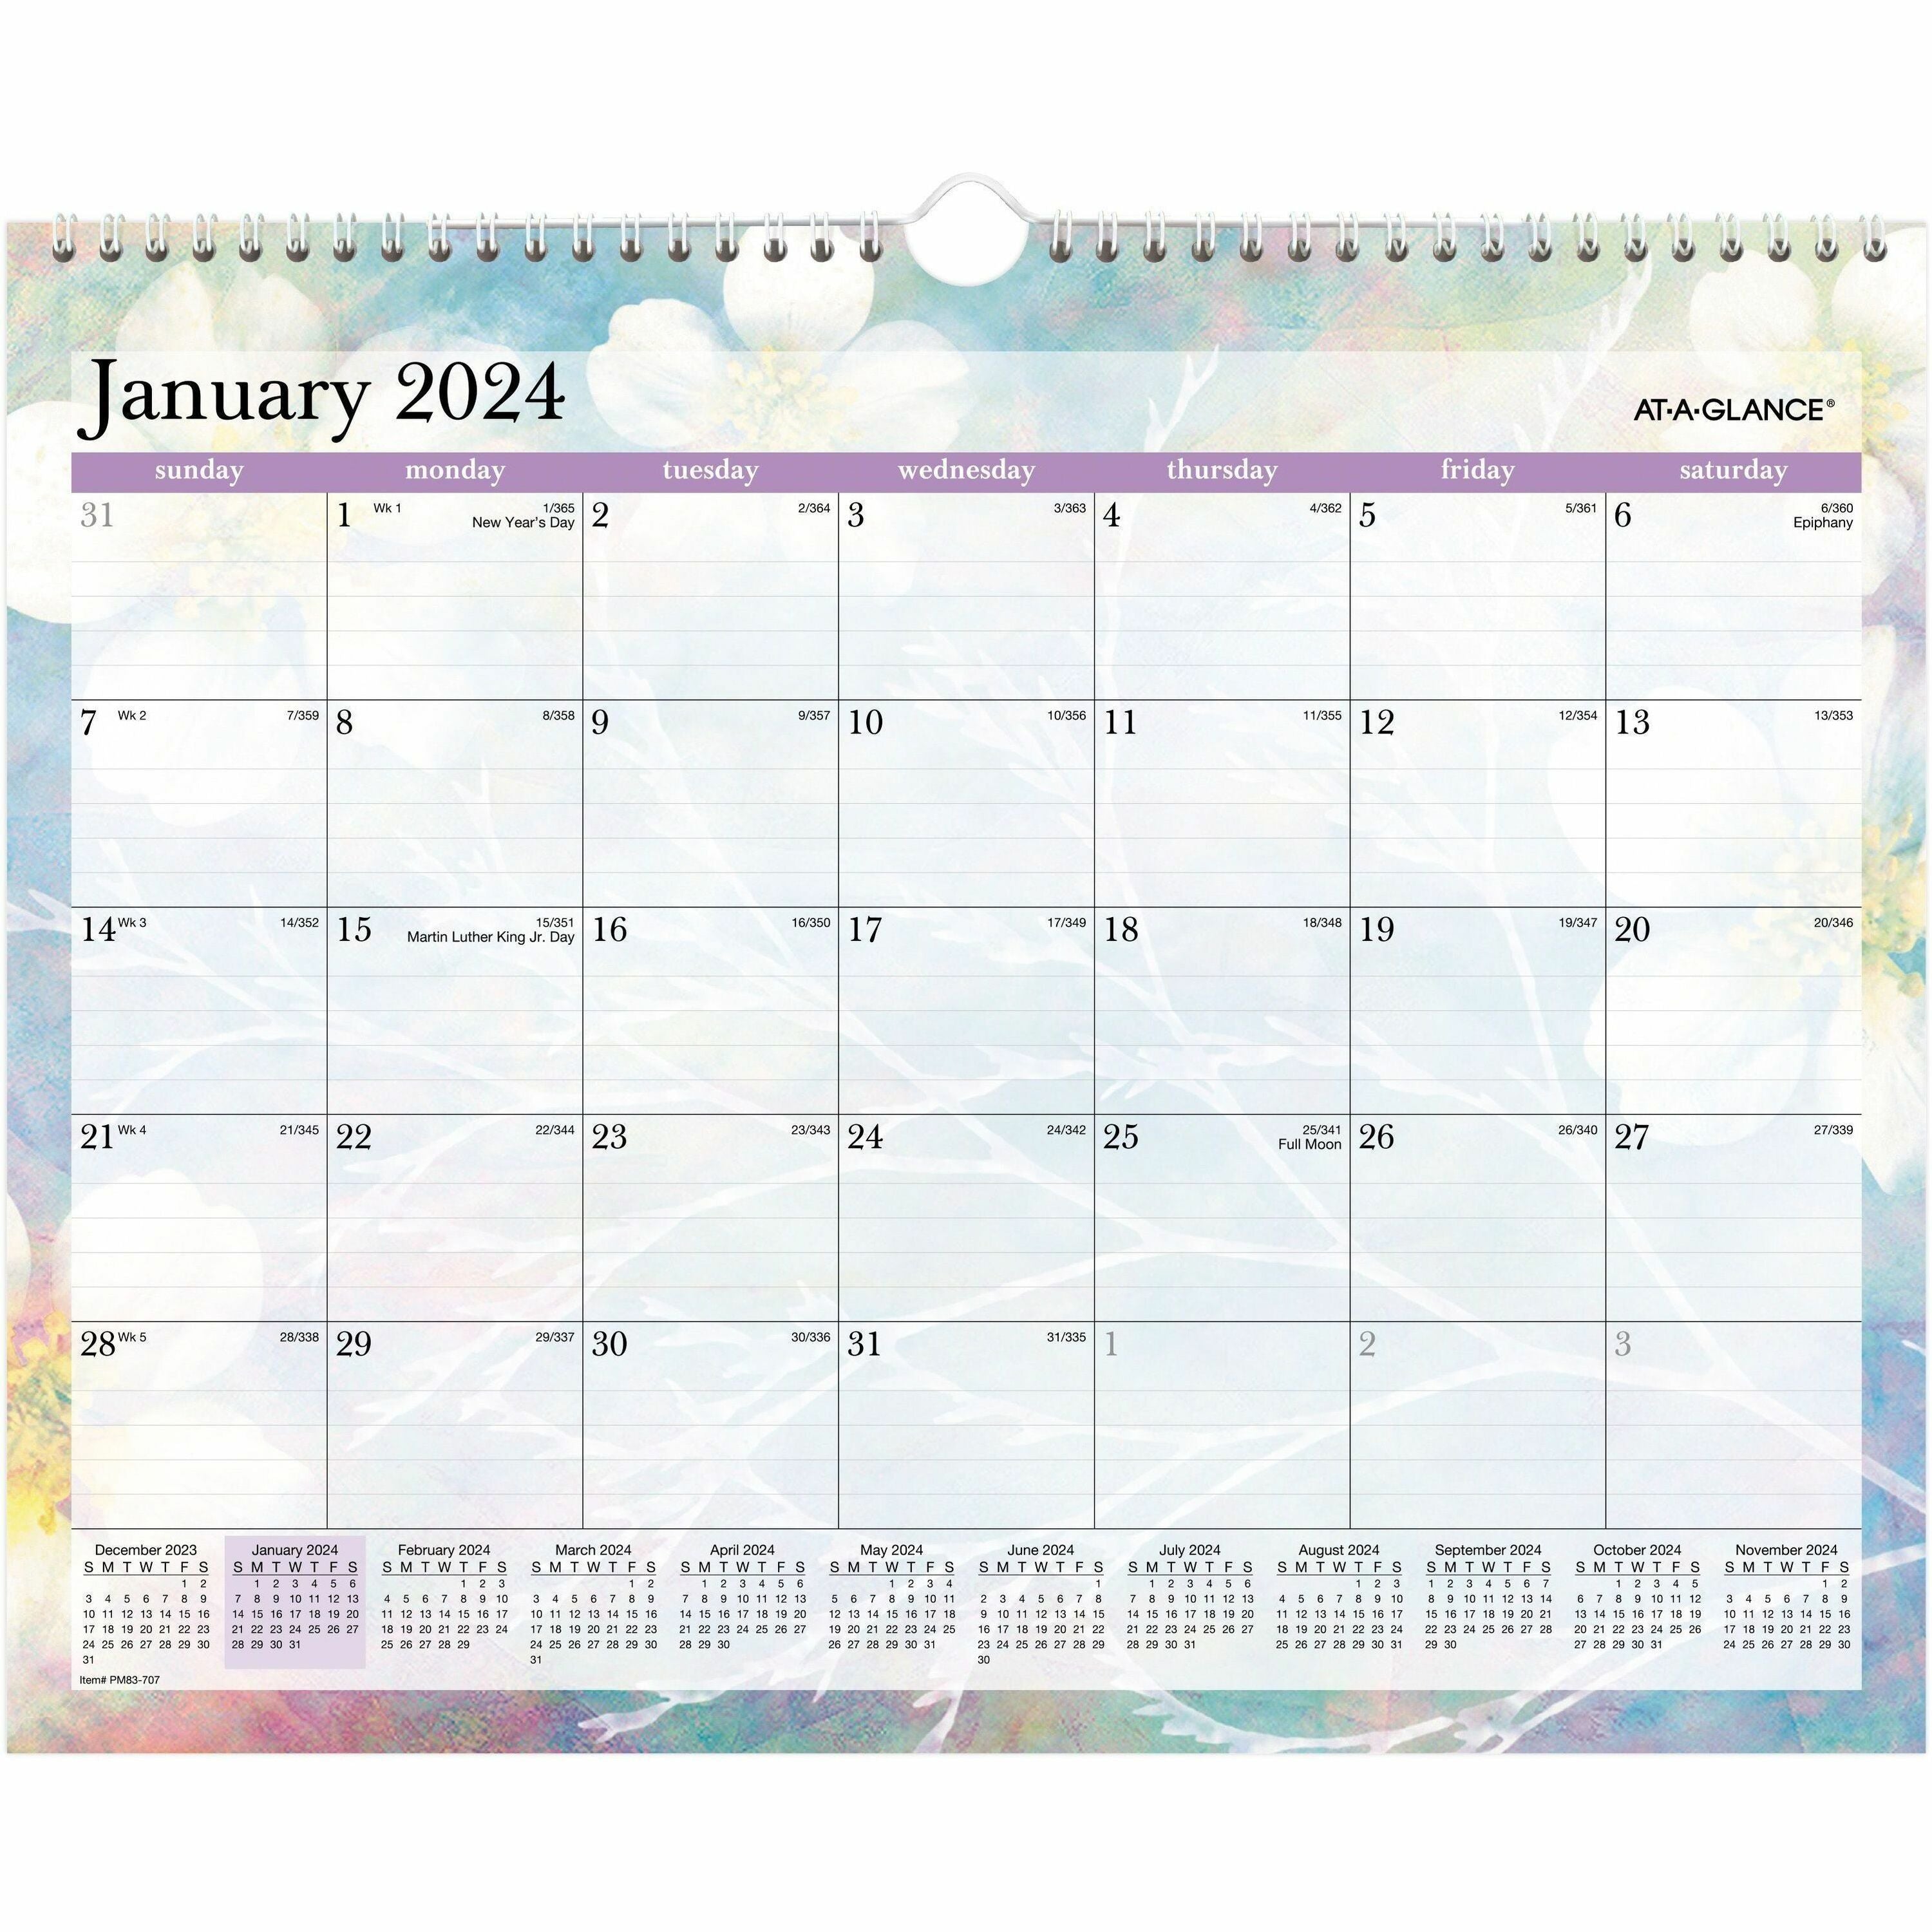 at-a-glance-dreams-wall-calendar-medium-size-julian-dates-monthly-12-month-january-2024-december-2024-1-month-single-page-layout-15-x-12-white-sheet-wire-bound-blue-white-purple-yellow-paper-12-height-x-15-width-dated_aagpm83707 - 1